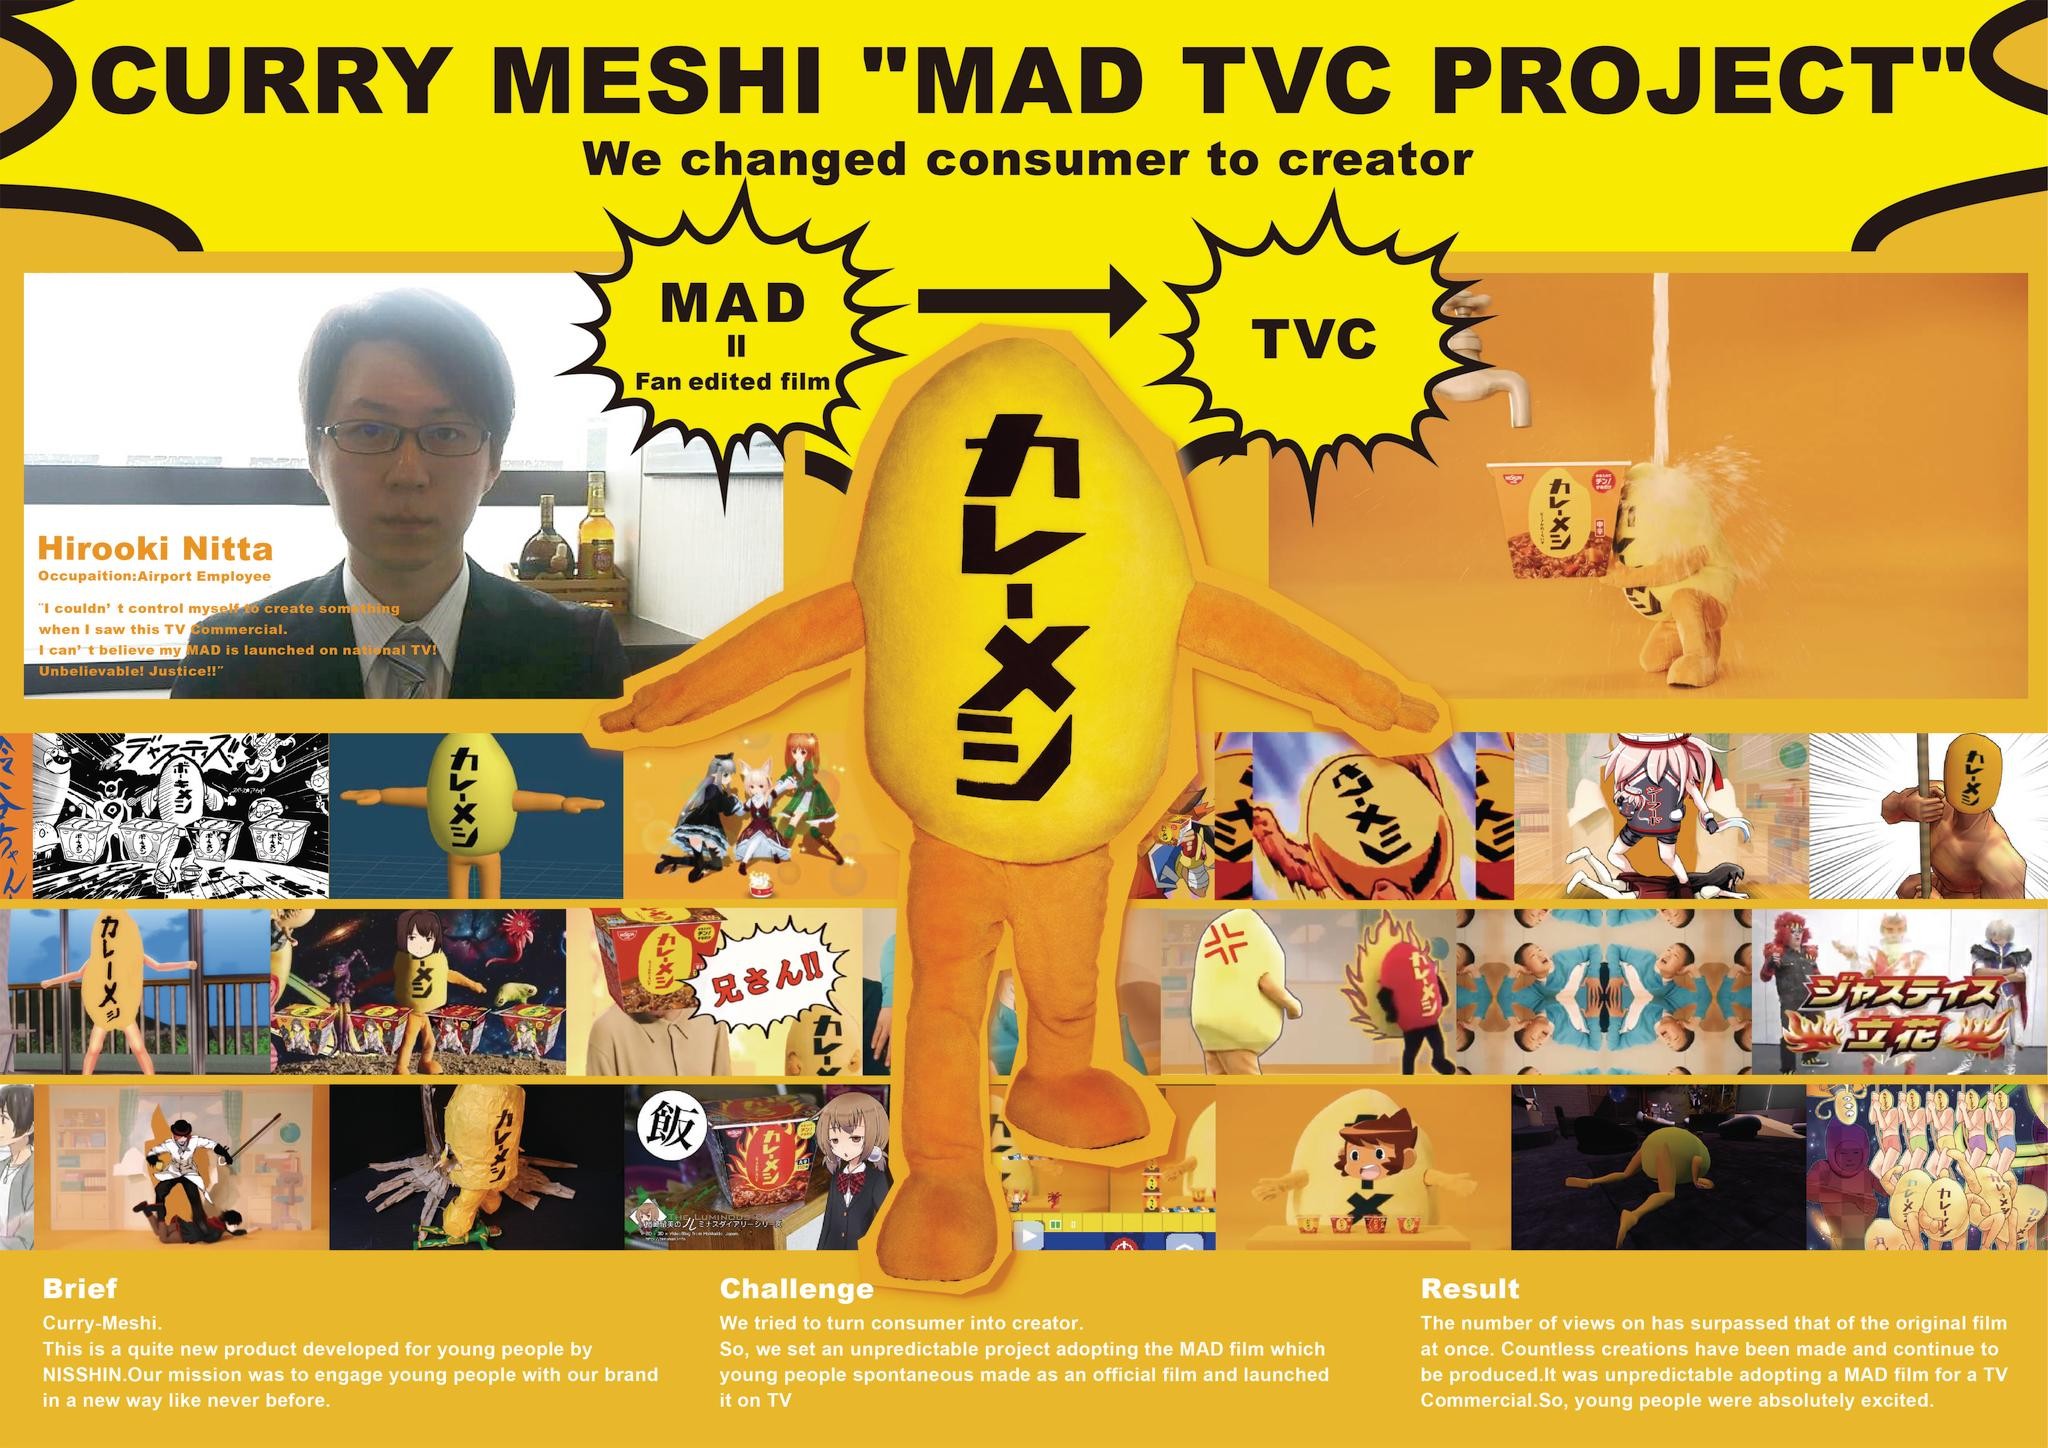 CURRY MESHI MAD TVC PROJECT